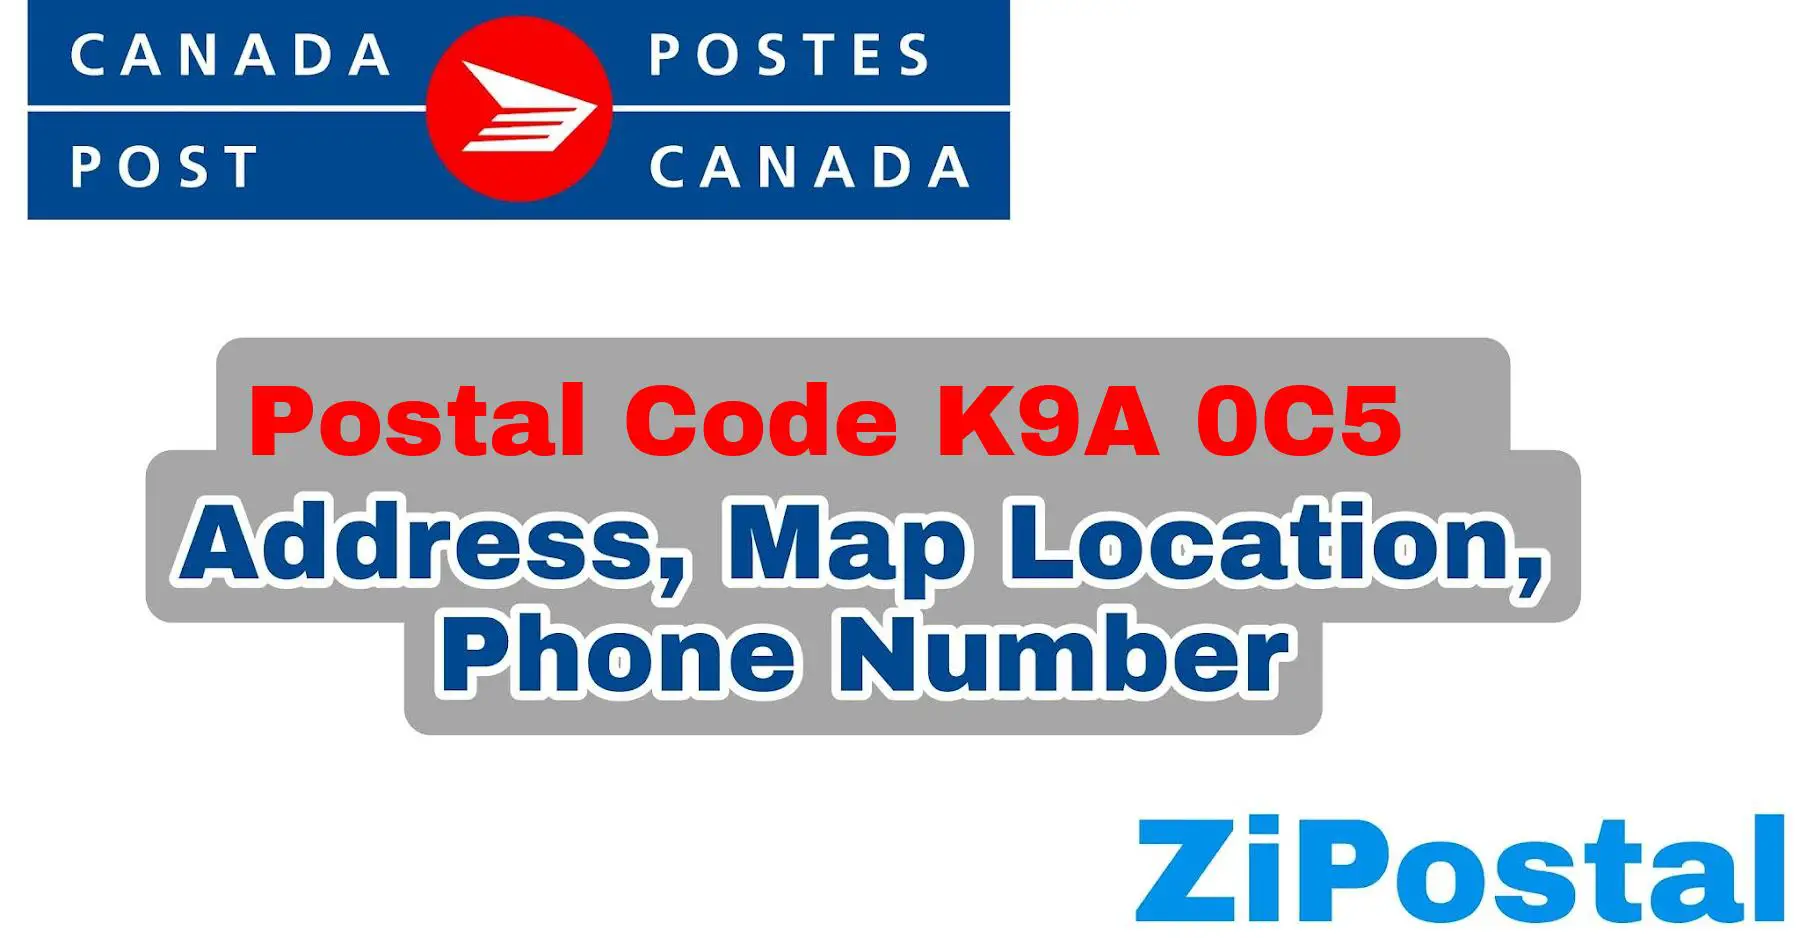 Postal Code K9A 0C5 Address Map Location and Phone Number